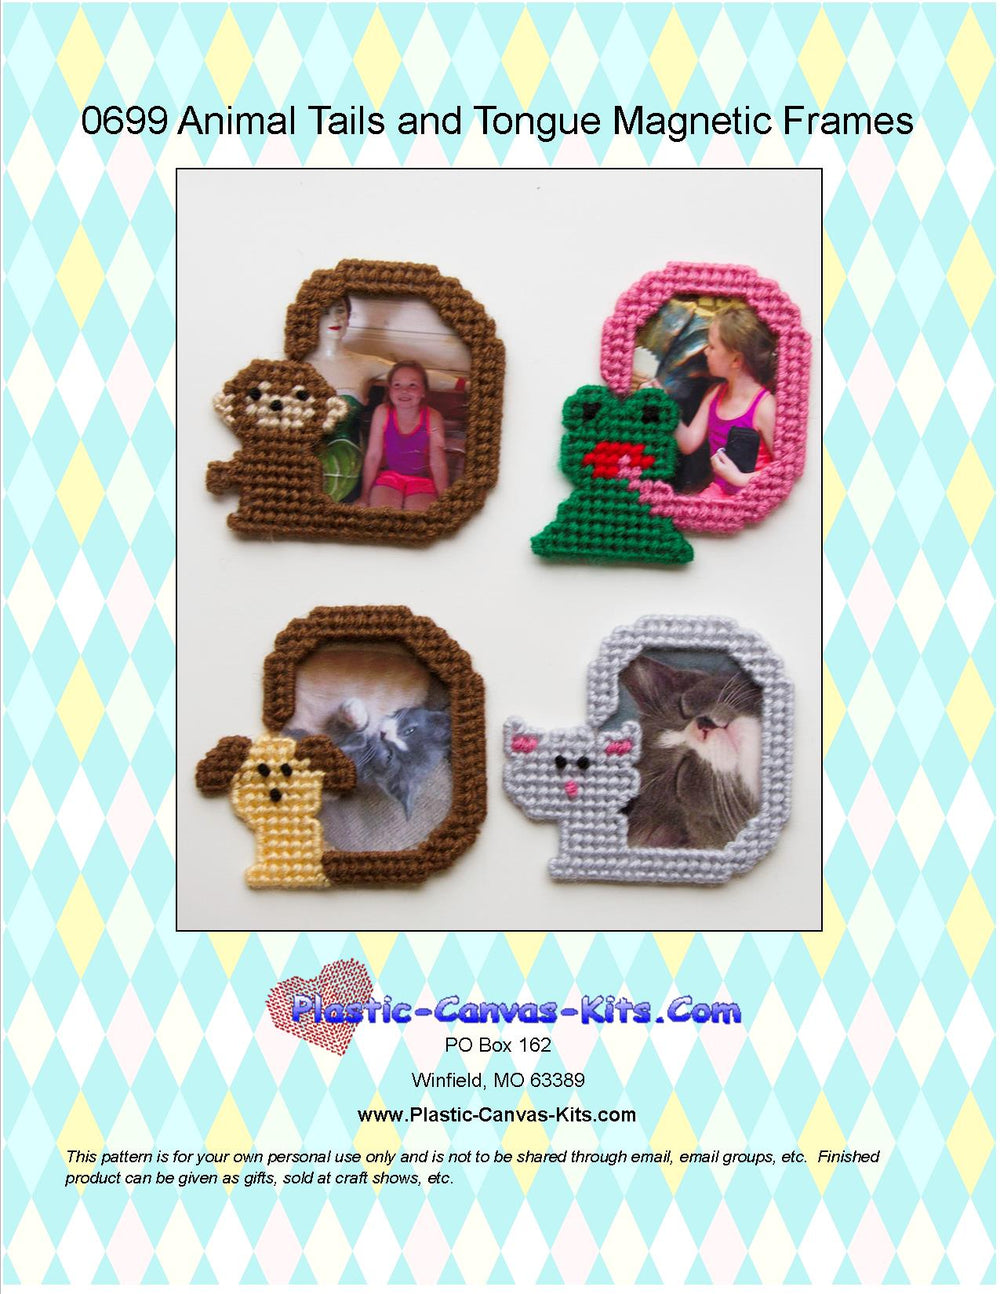 Tails and Tongue Animal Magnetic Frames